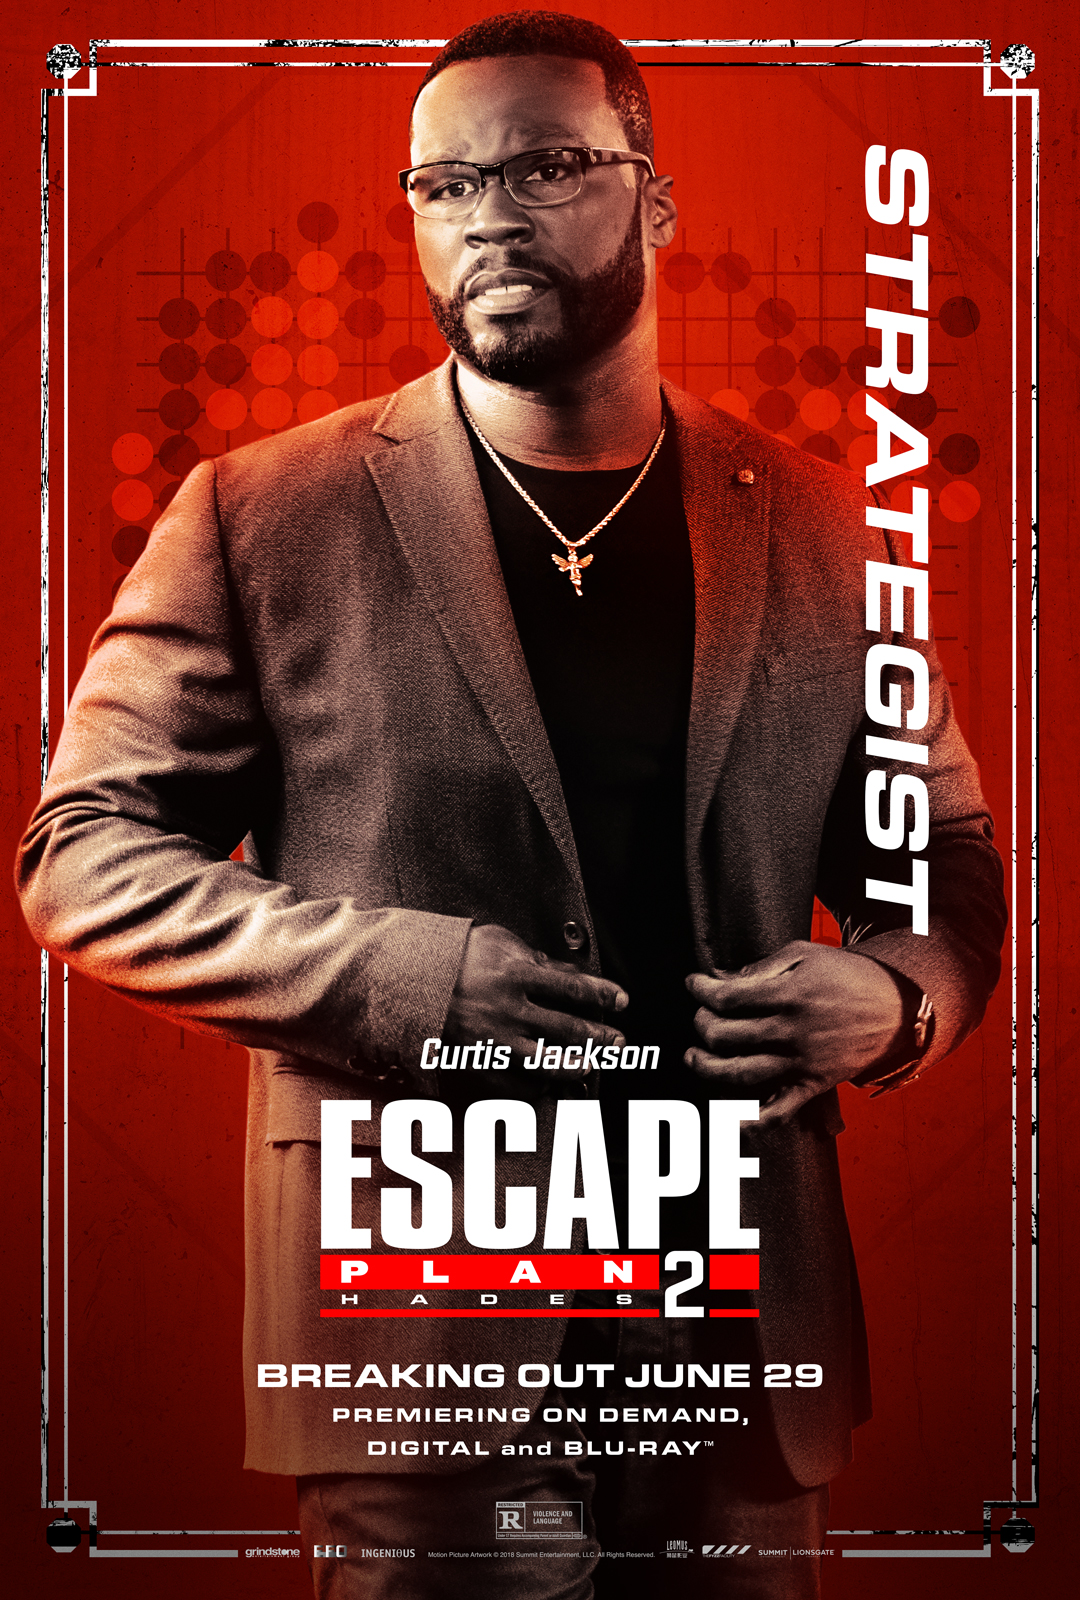 Escape Plan 2 Hades 2018 Movie Poster Wallpapers